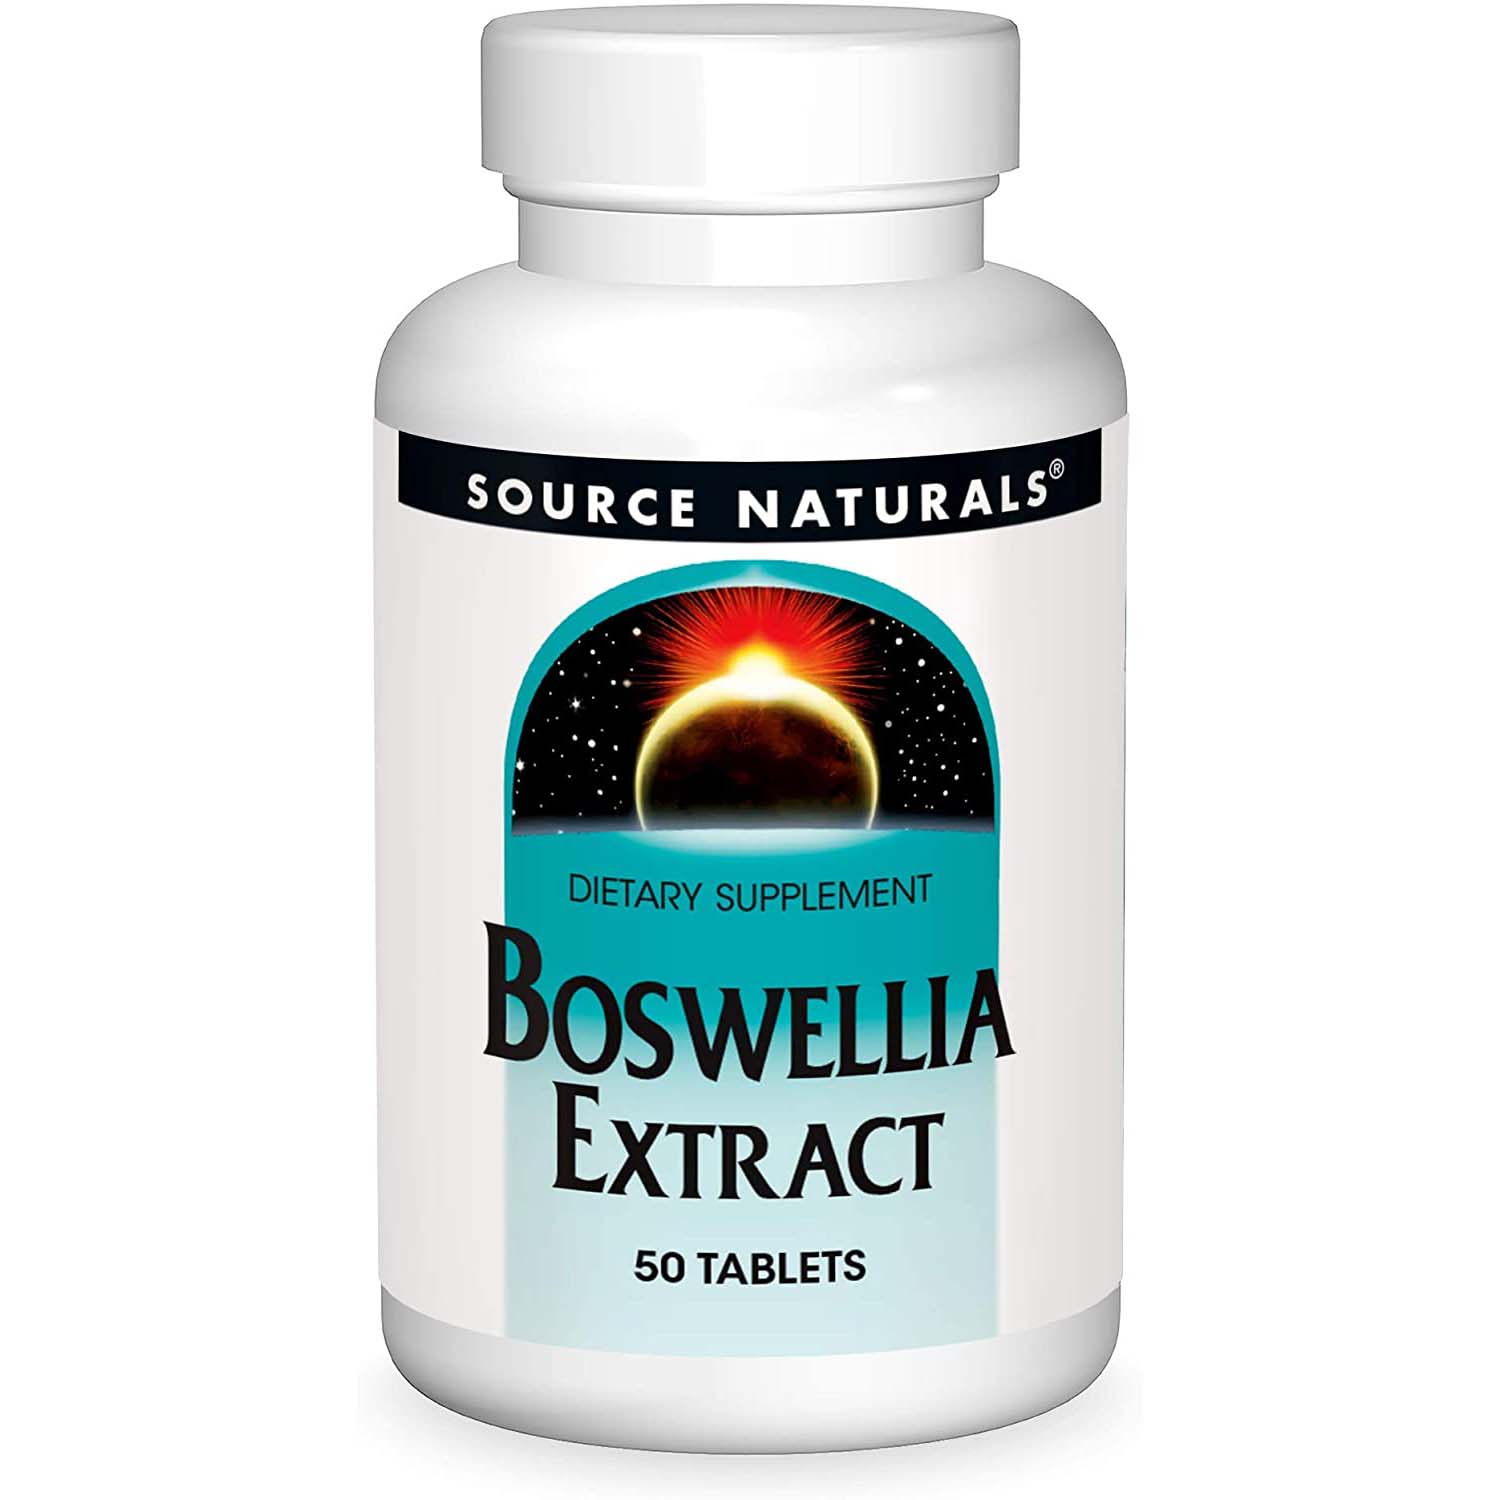 Source Naturals Boswellia Extract 50 Tablets